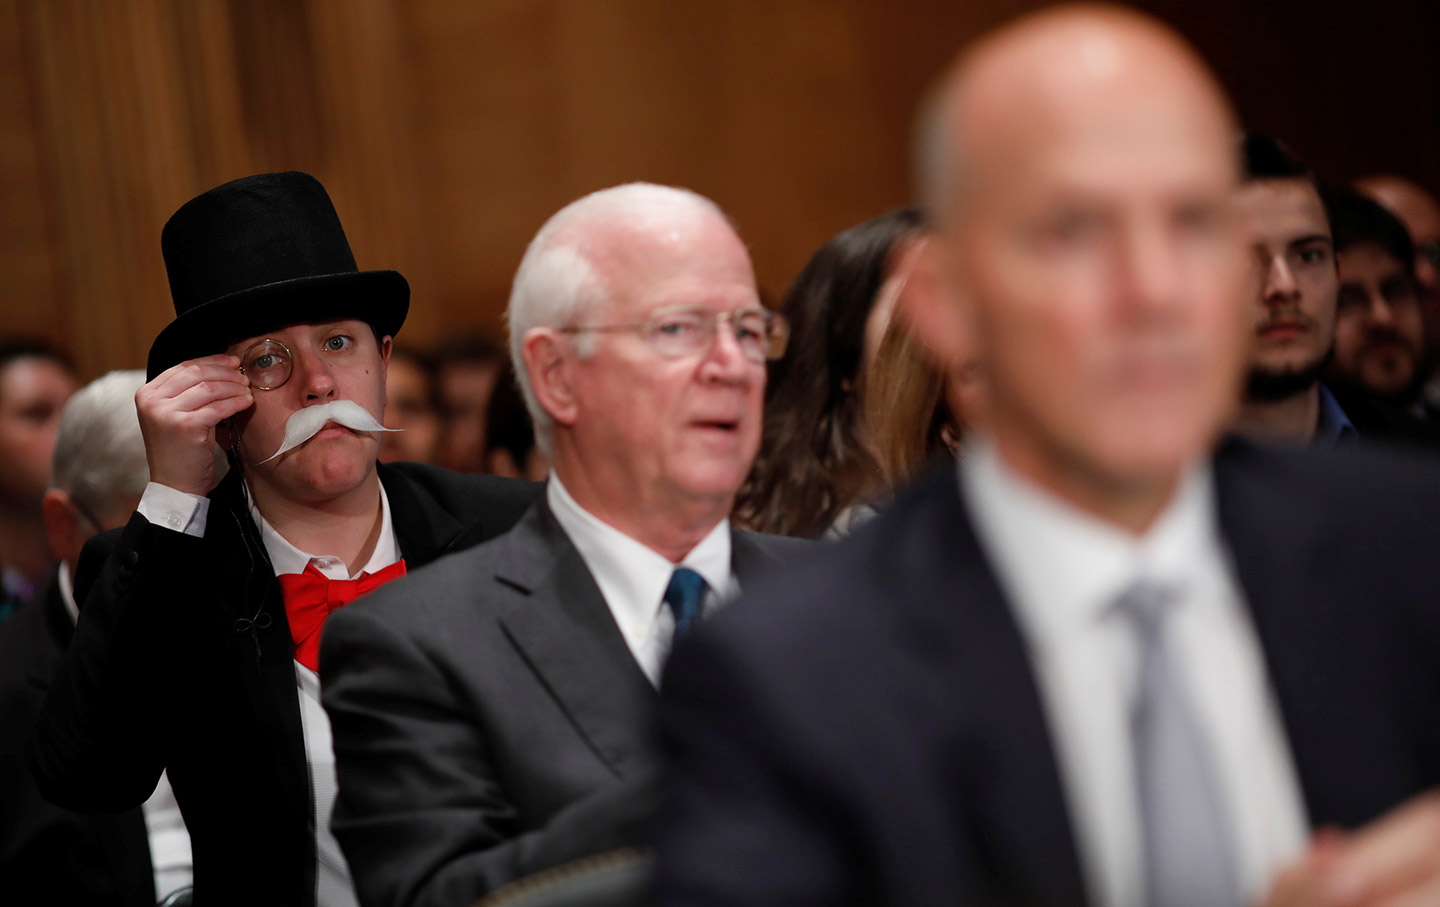 monopoly man picture